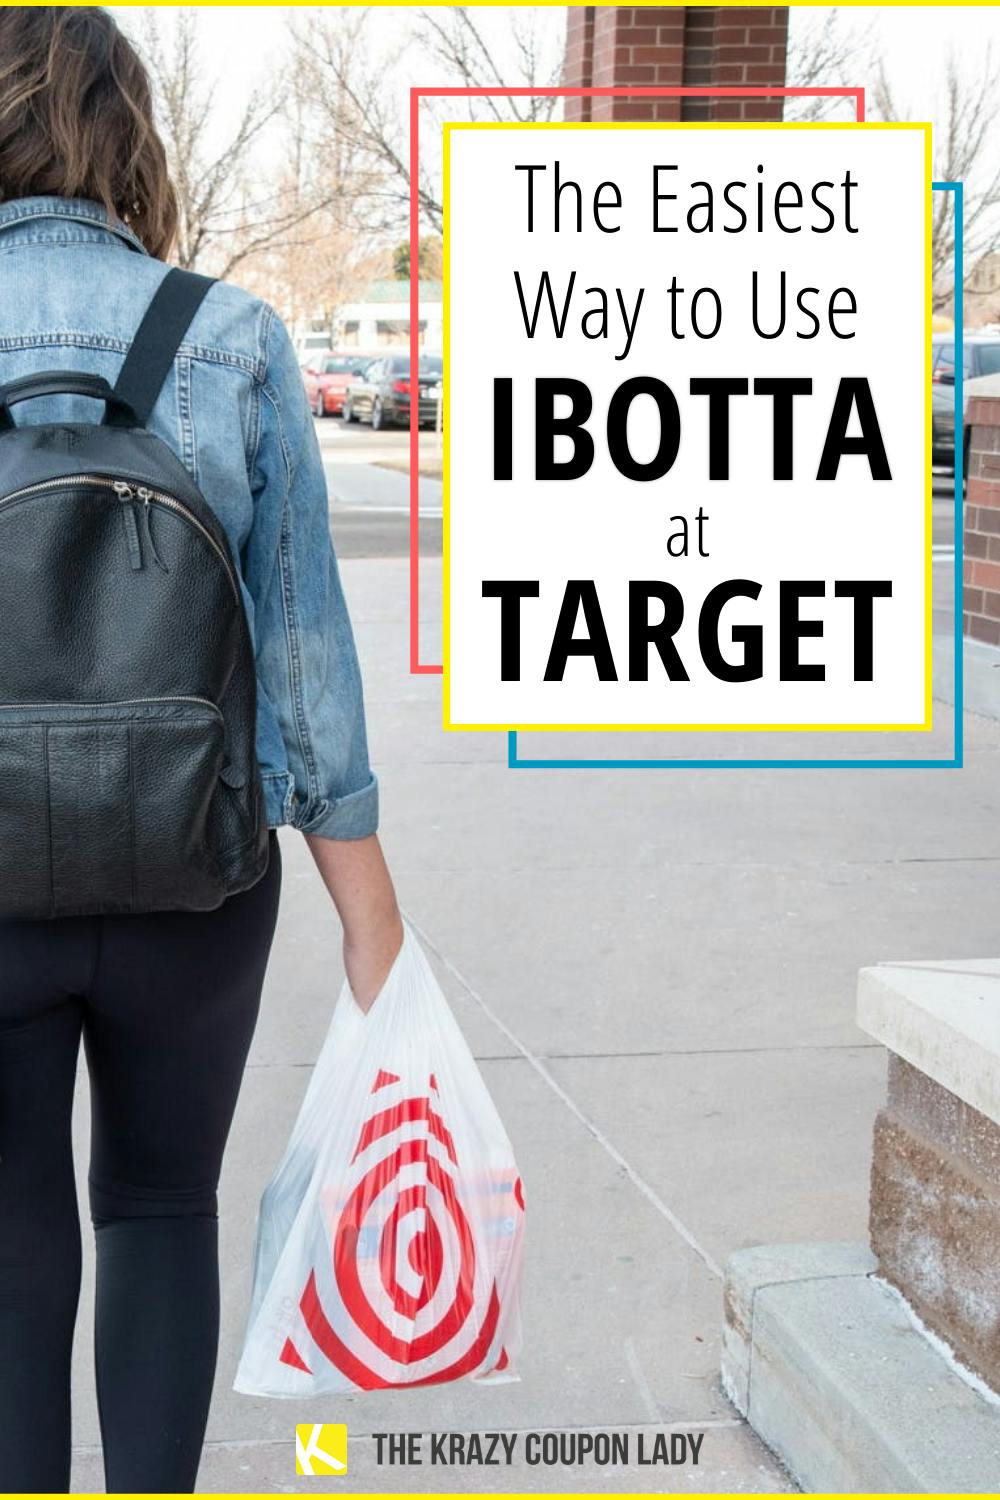 How to Use Ibotta at Target Now That Automatic Redemption Is Gone